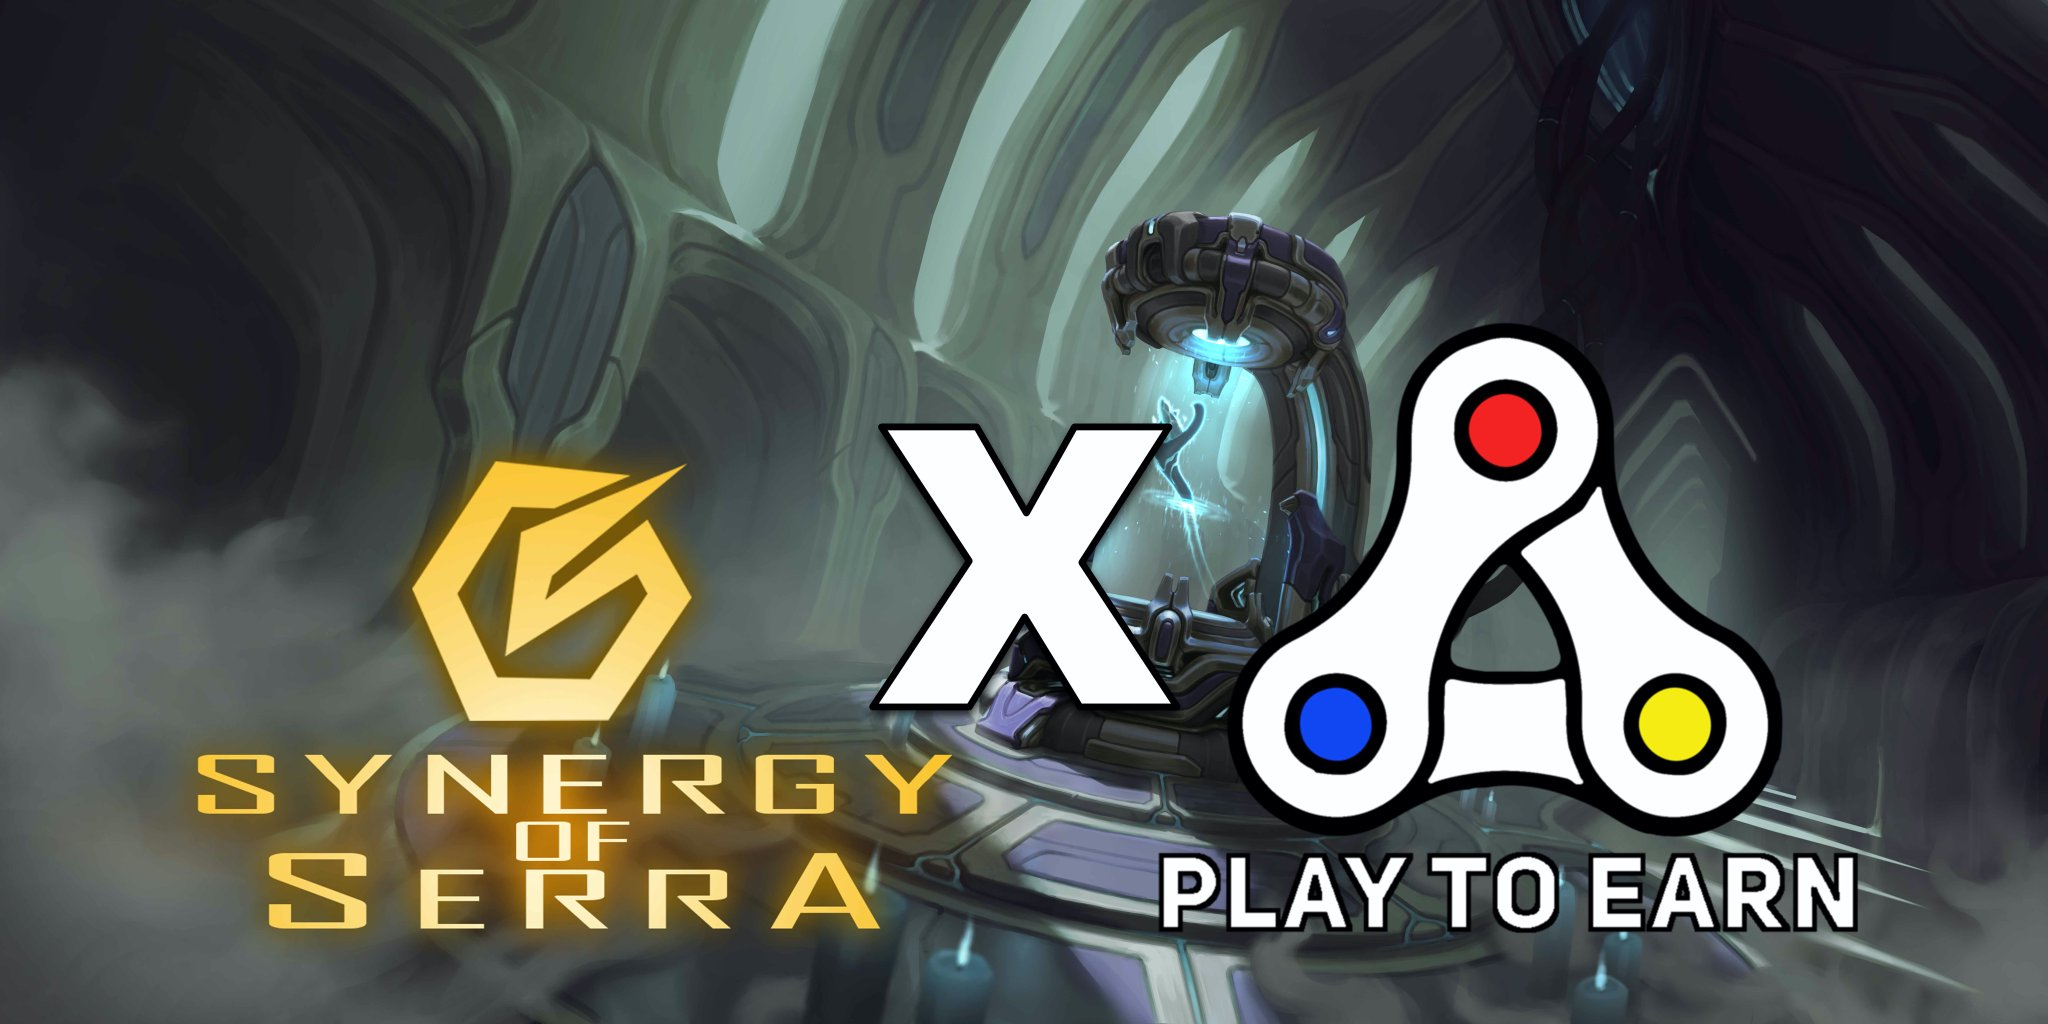 Play to Earn Partners with Synergy of Serra